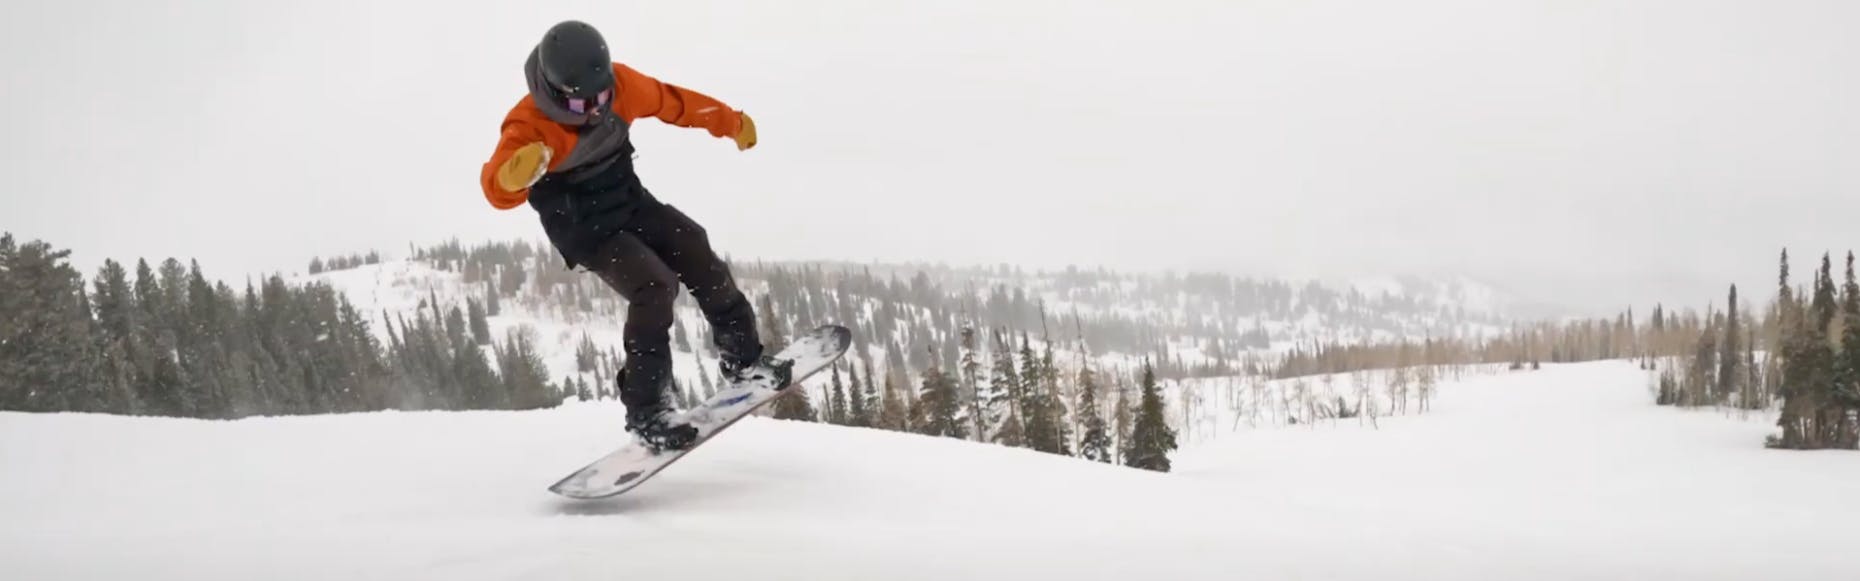 Curated Snowboard Expert Victor Von Claus jumping with the 2023 Ride Shadowban snowboard